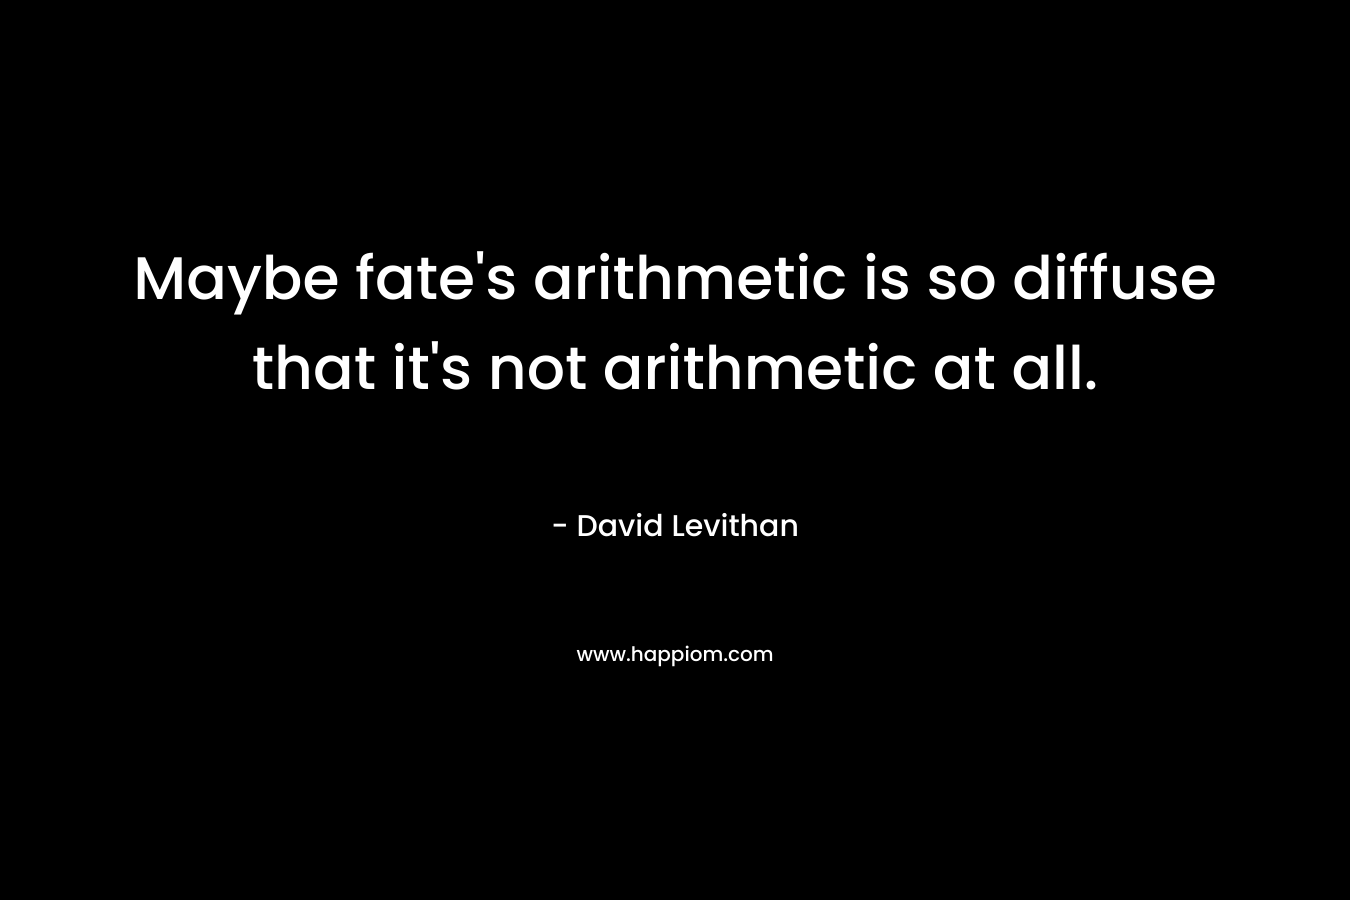 Maybe fate’s arithmetic is so diffuse that it’s not arithmetic at all. – David Levithan